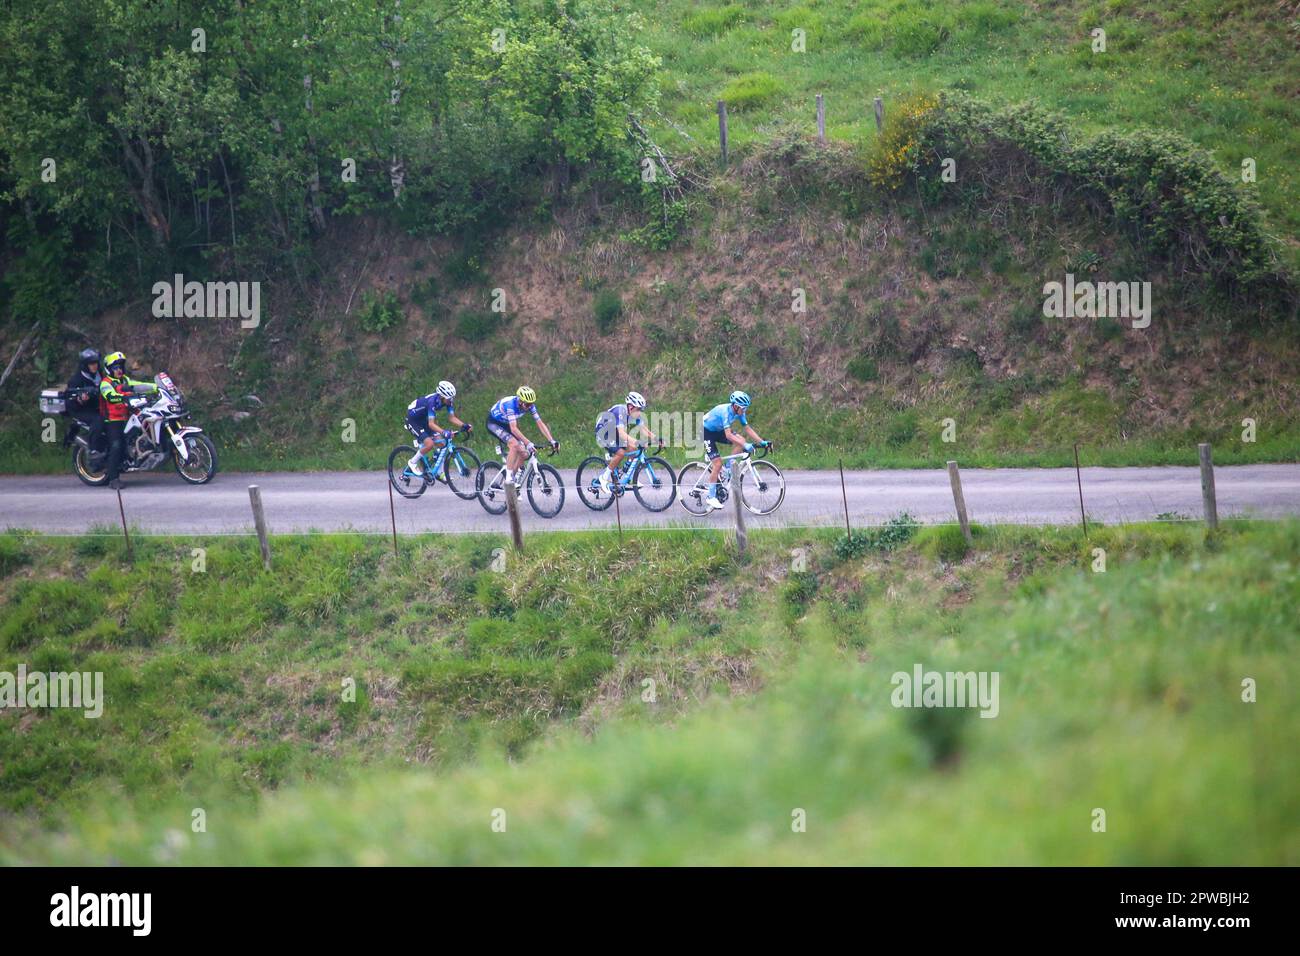 Las Tiendas, Spain, 29th April, 2023: The group of favorites pulled by Lorenzo Fortunato (EOLO-Kometa, R), followed by Einer Augusto Rubio (Movistar Team, 2R), the blue jersey of leader, Damien Howson (Q36.5 Pro Cycling Team, 2L) and Ivan Ramiro Sosa (Movistar Team, L) during the 2nd stage of the Vuelta a Asturias 2023 between Candas and Cangas del Narcea, on April 29, 2023, in Las Tiendas, Spain. Credit: Alberto Brevers / Alamy Live News Stock Photo